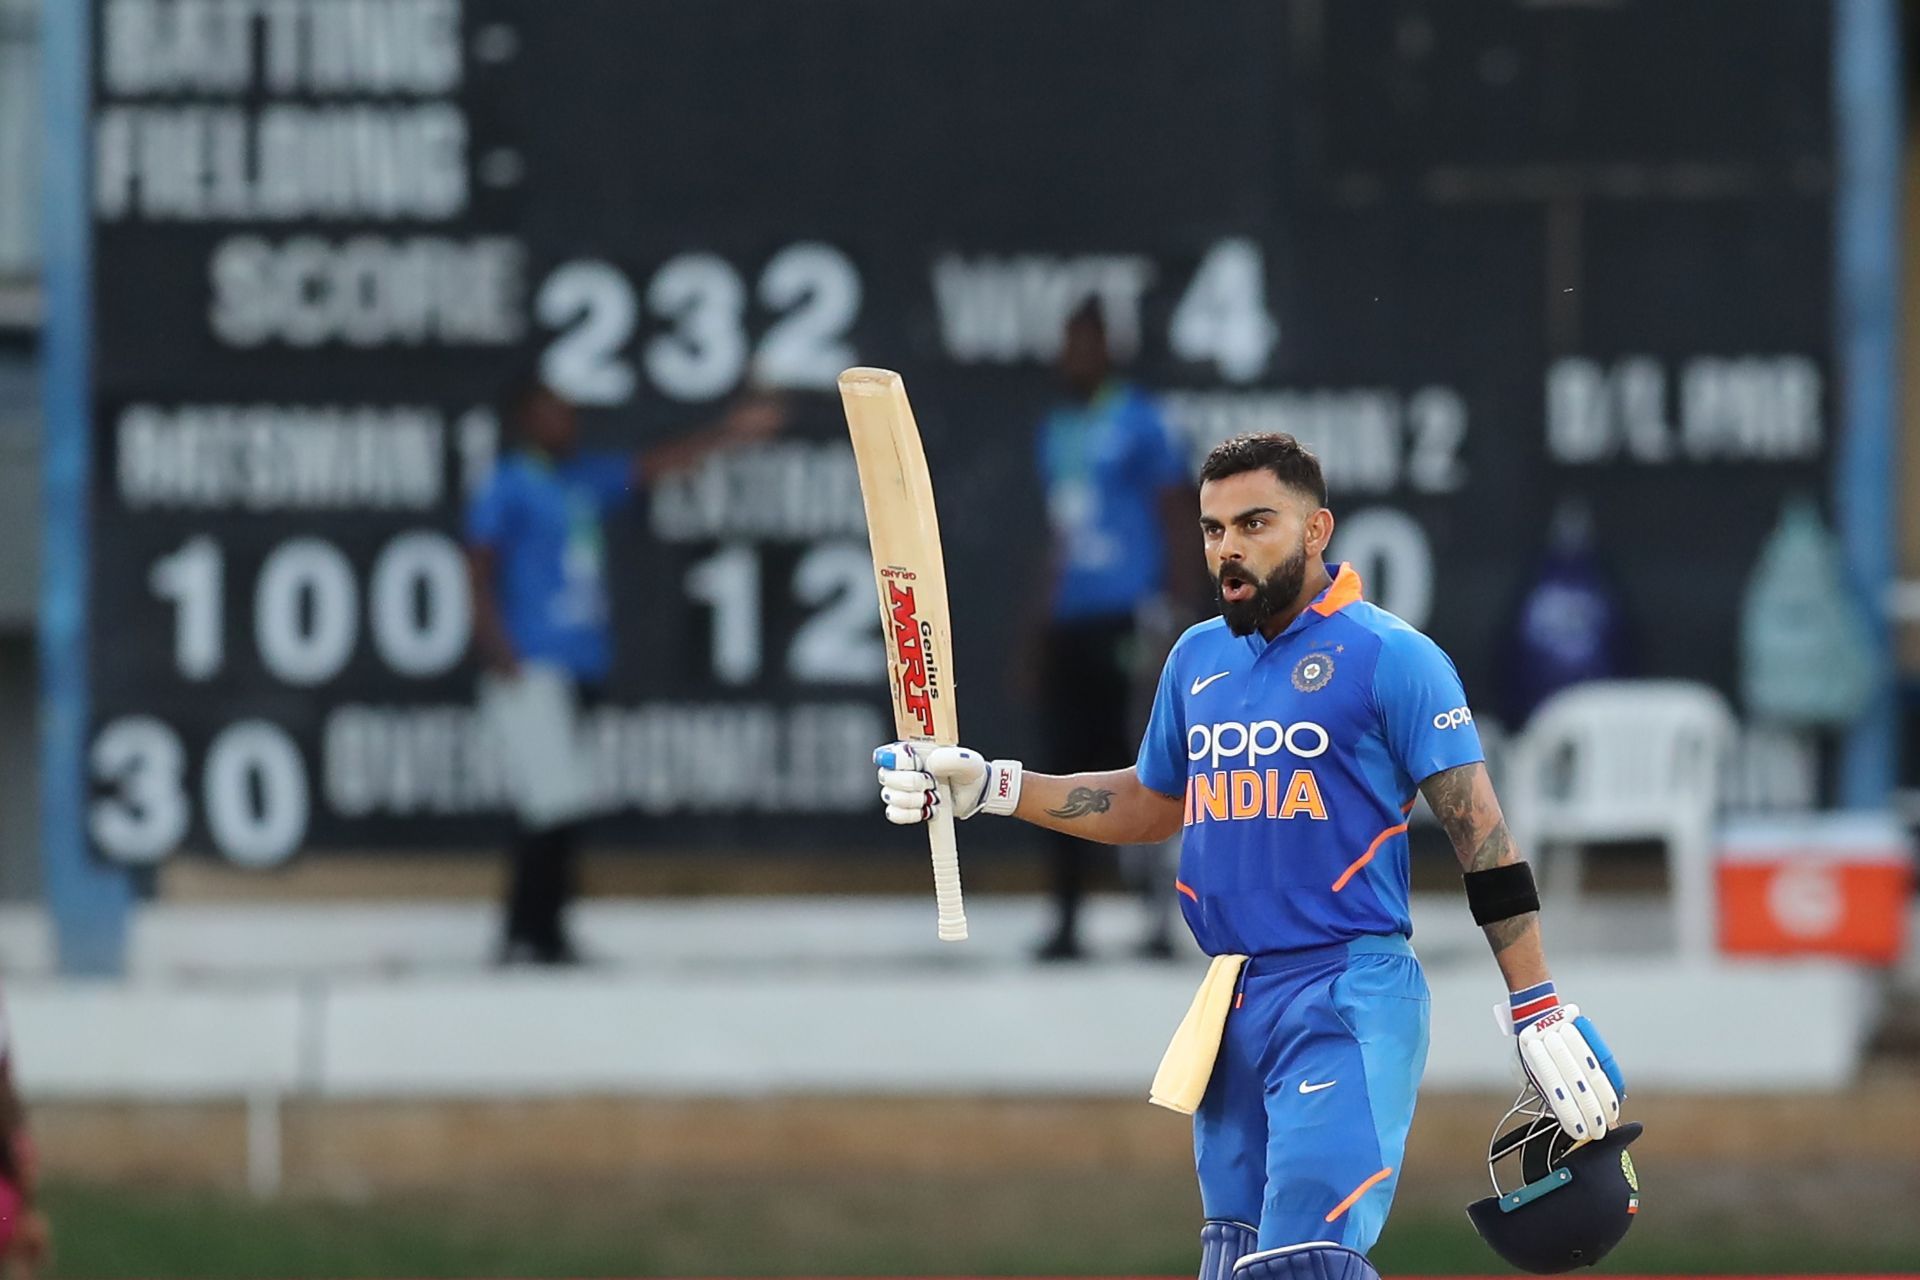 Virat Kohli has an excellent record in ODI matches against West Indies